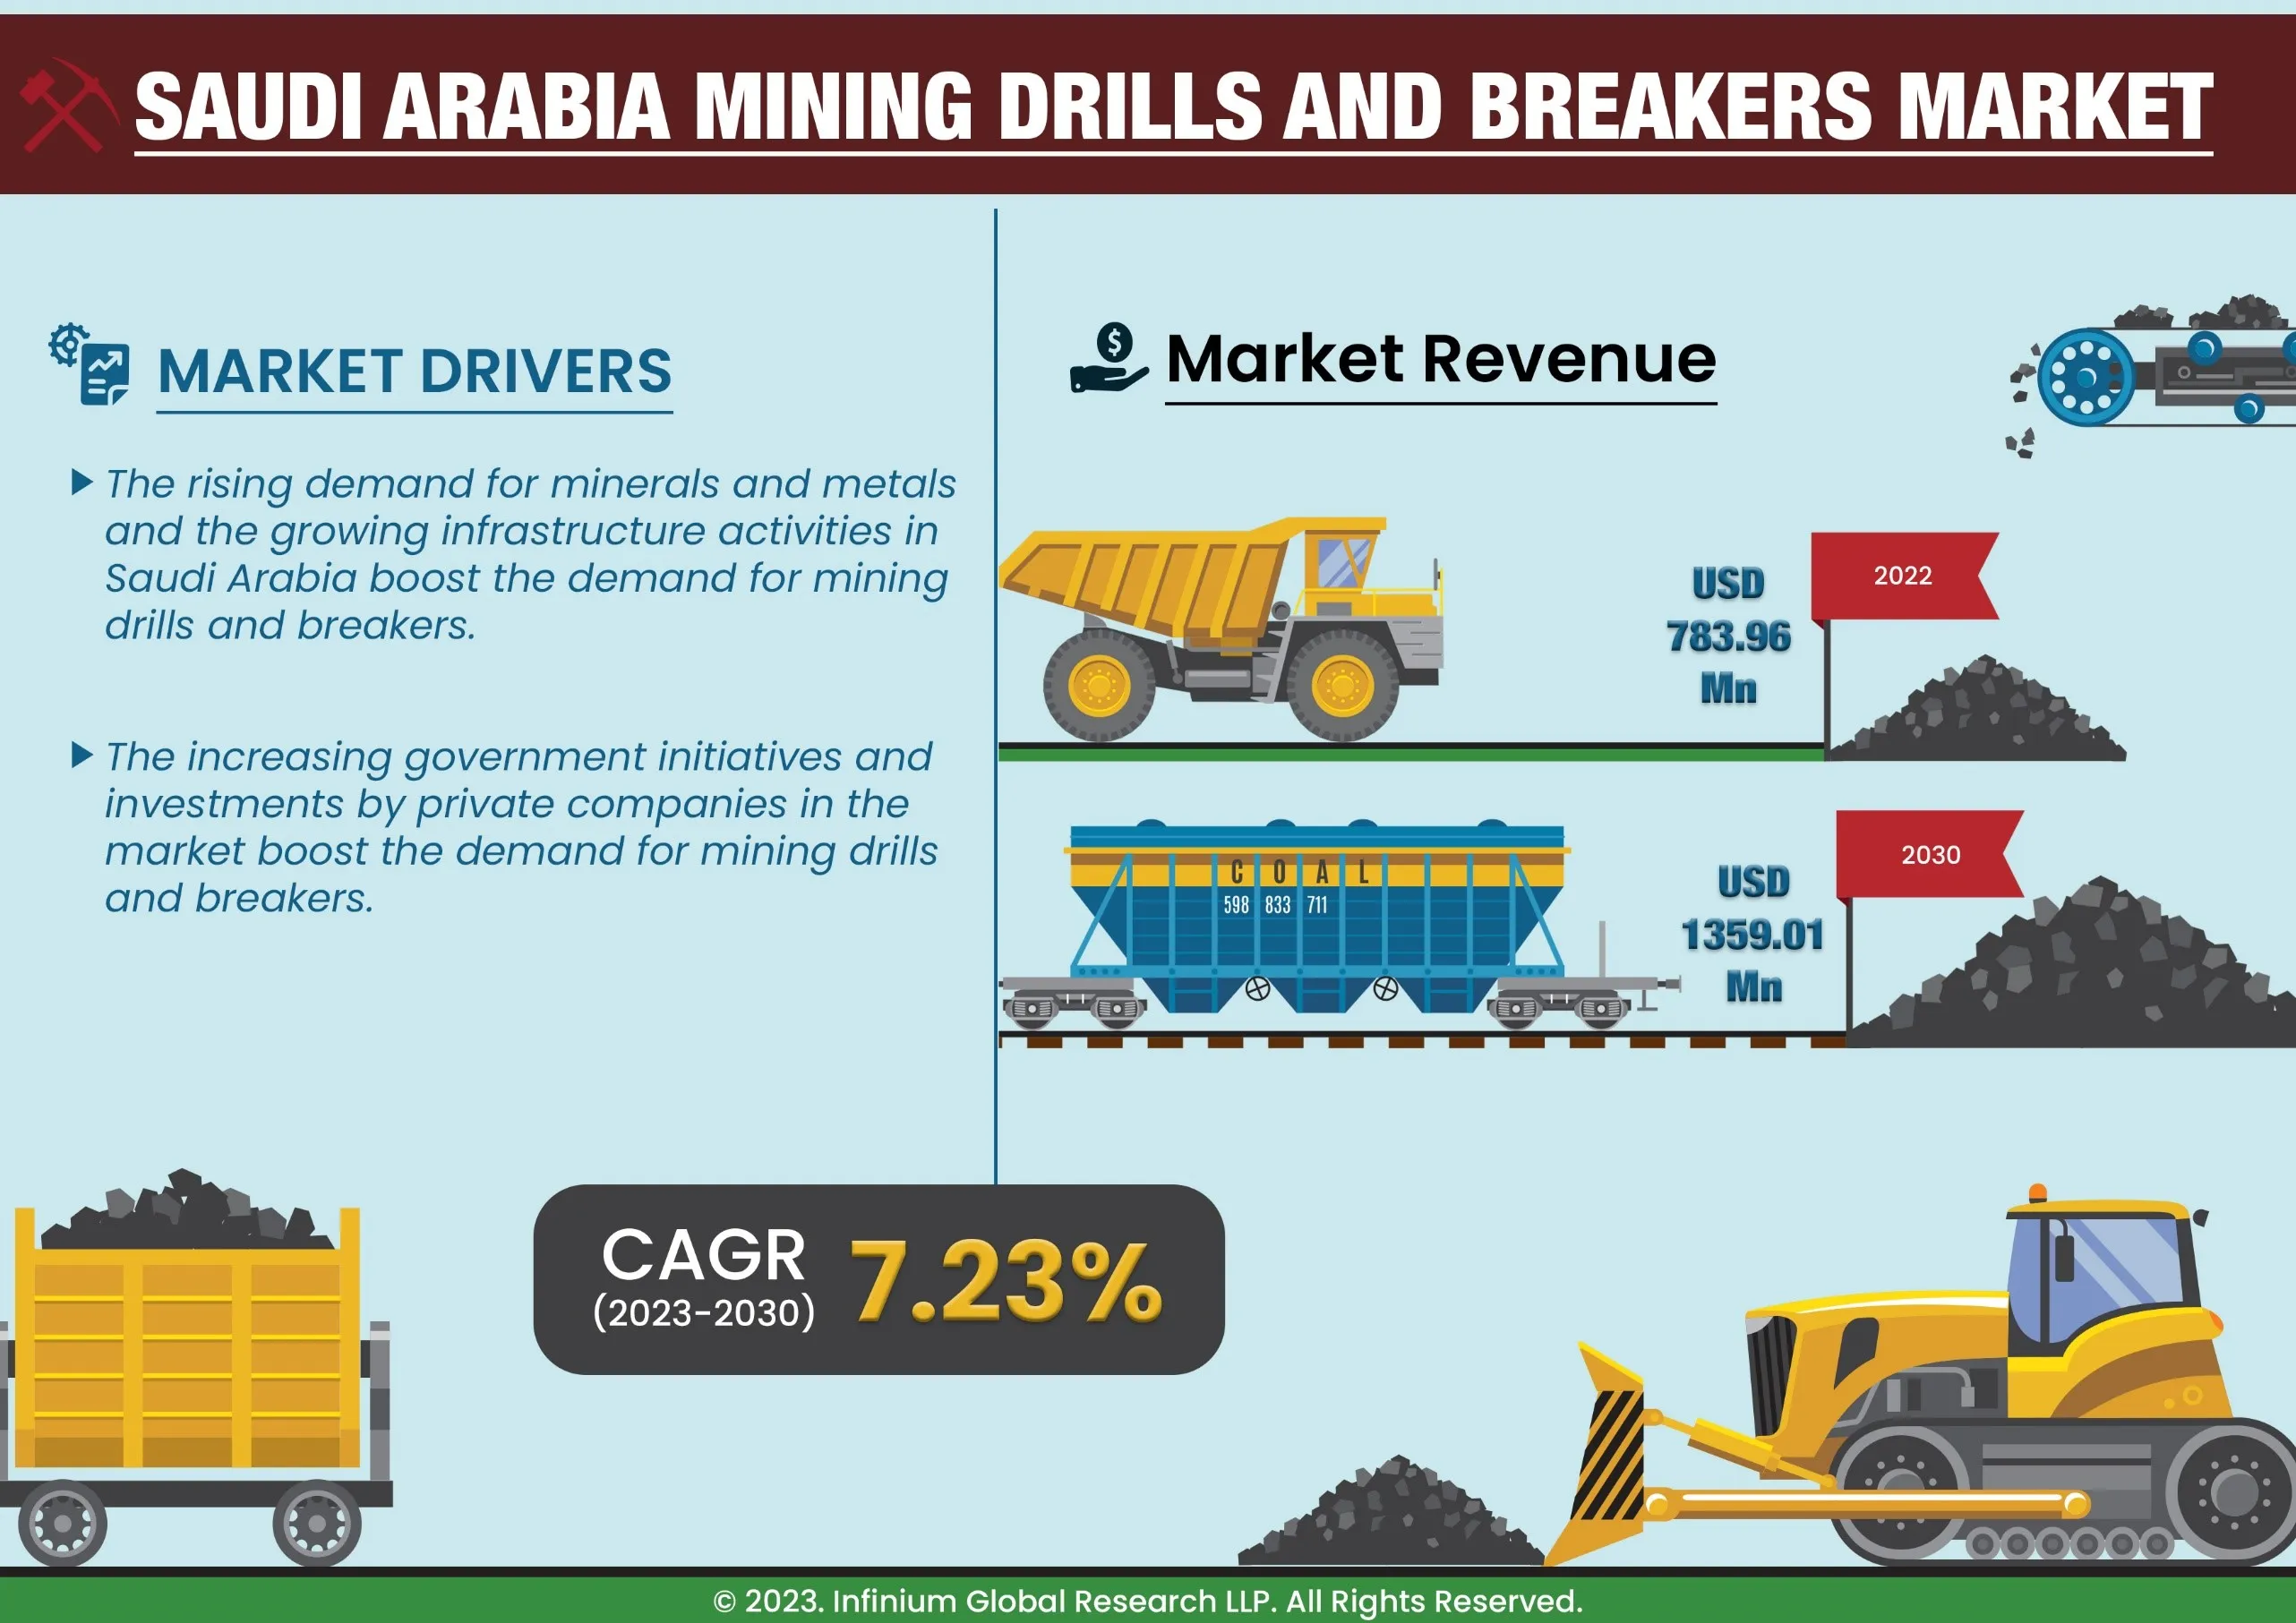 Saudi Arabia Mining Drills and Breakers Market was Valued at USD 783.96 Million in 2022 and is Expected to Reach USD 1359.01 Million by 2030 and Grow at a CAGR of 7.23% Over the Forecast Period.